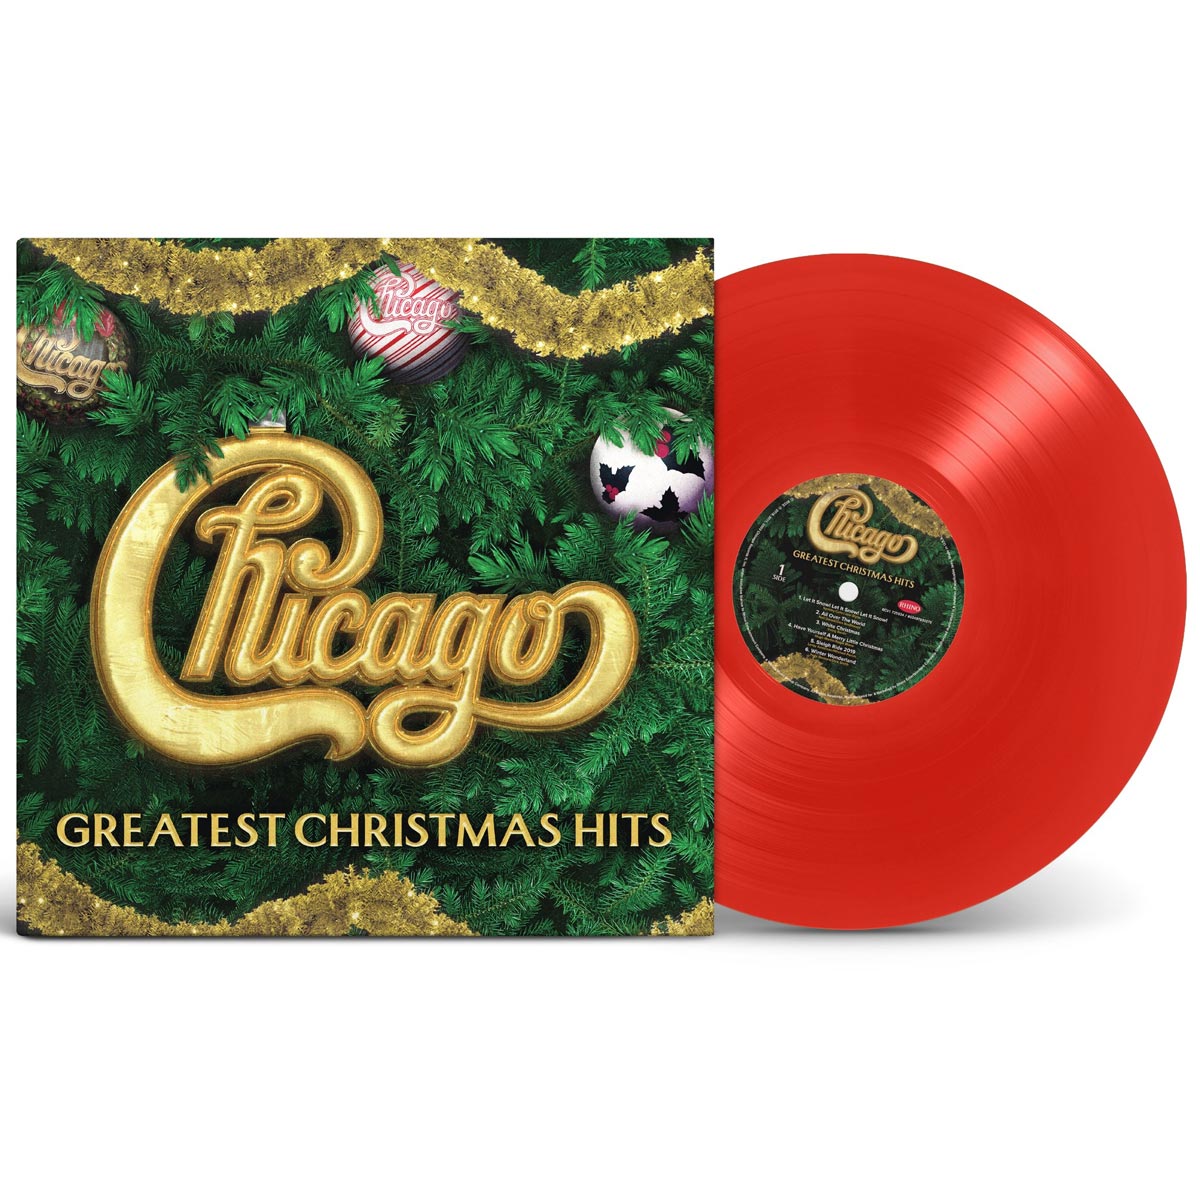 Chicago---Greatest-Christmas-Hits-red-vinyl